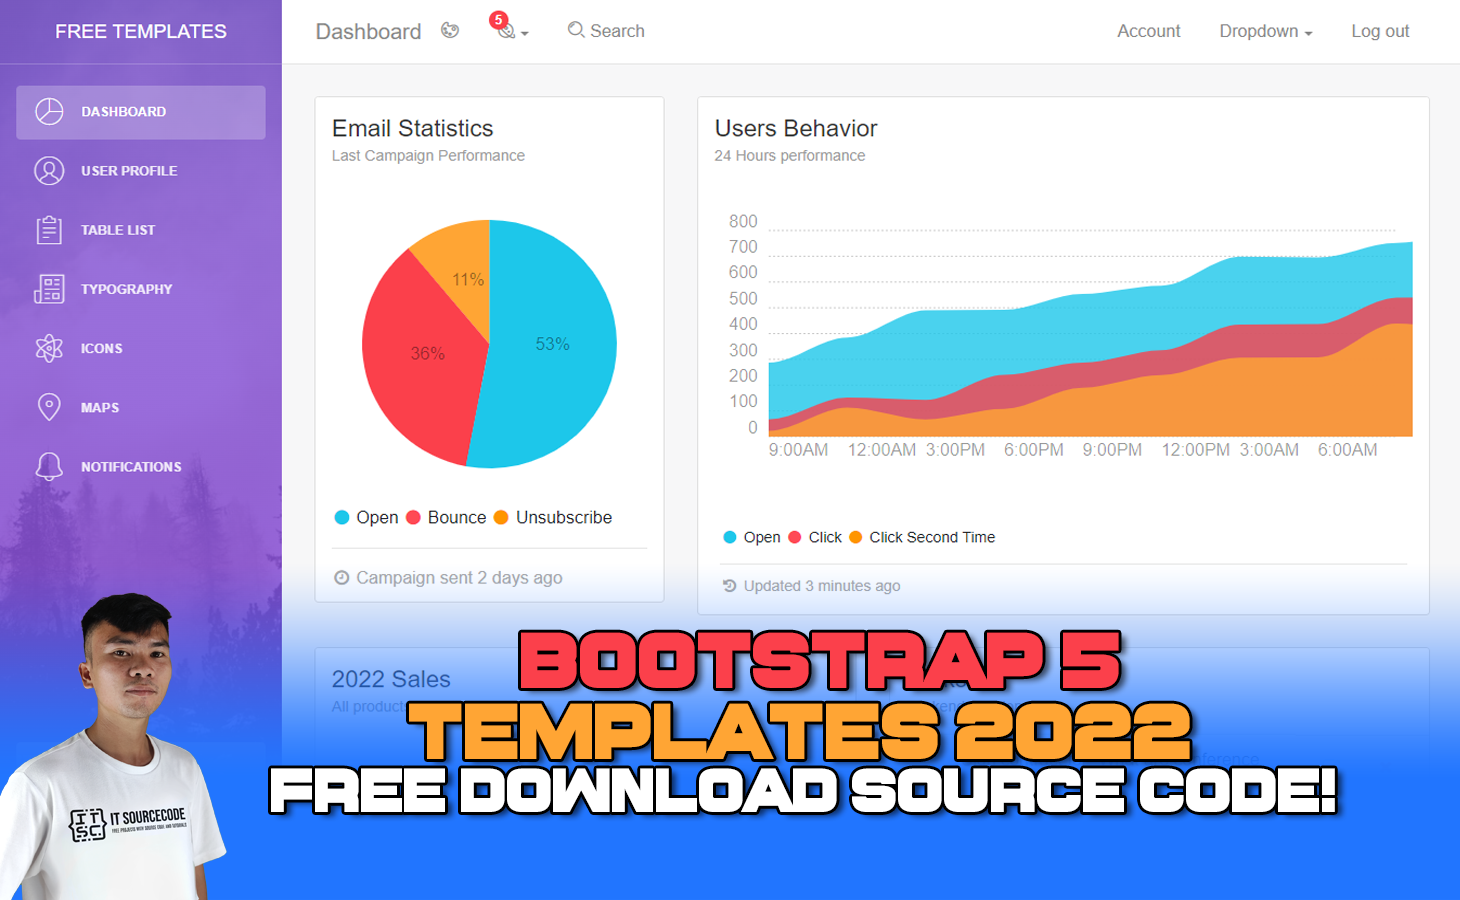 bootstrap-5-templates-free-download-2022-with-source-code